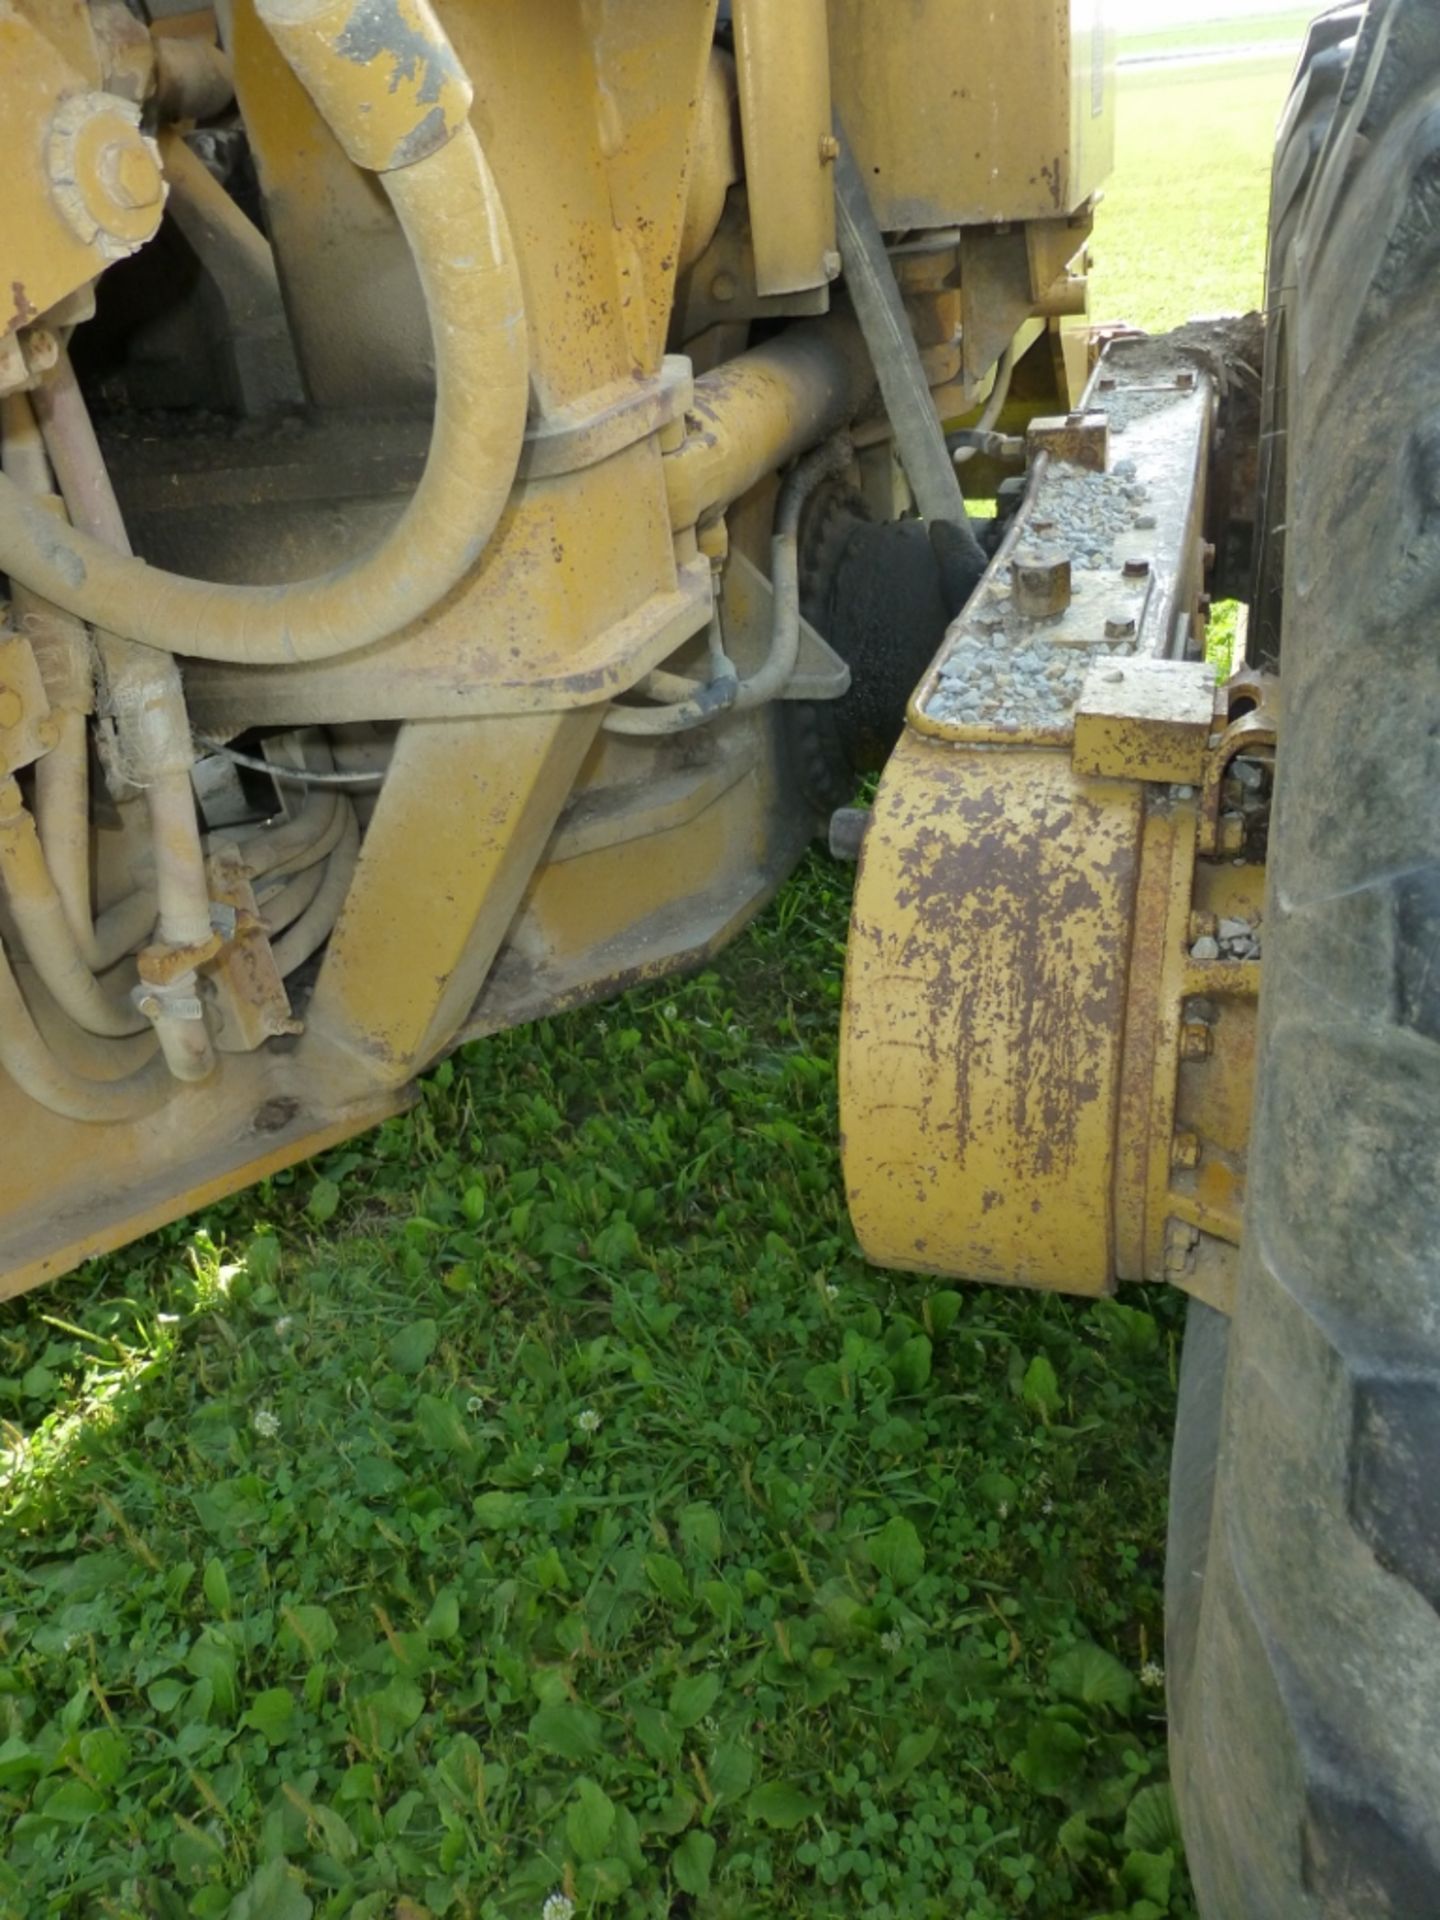 Caterpillar 120G motor grader with 13'10" moldboard se:87v871. Power shift. 7720 unverified hrs. - Image 3 of 27